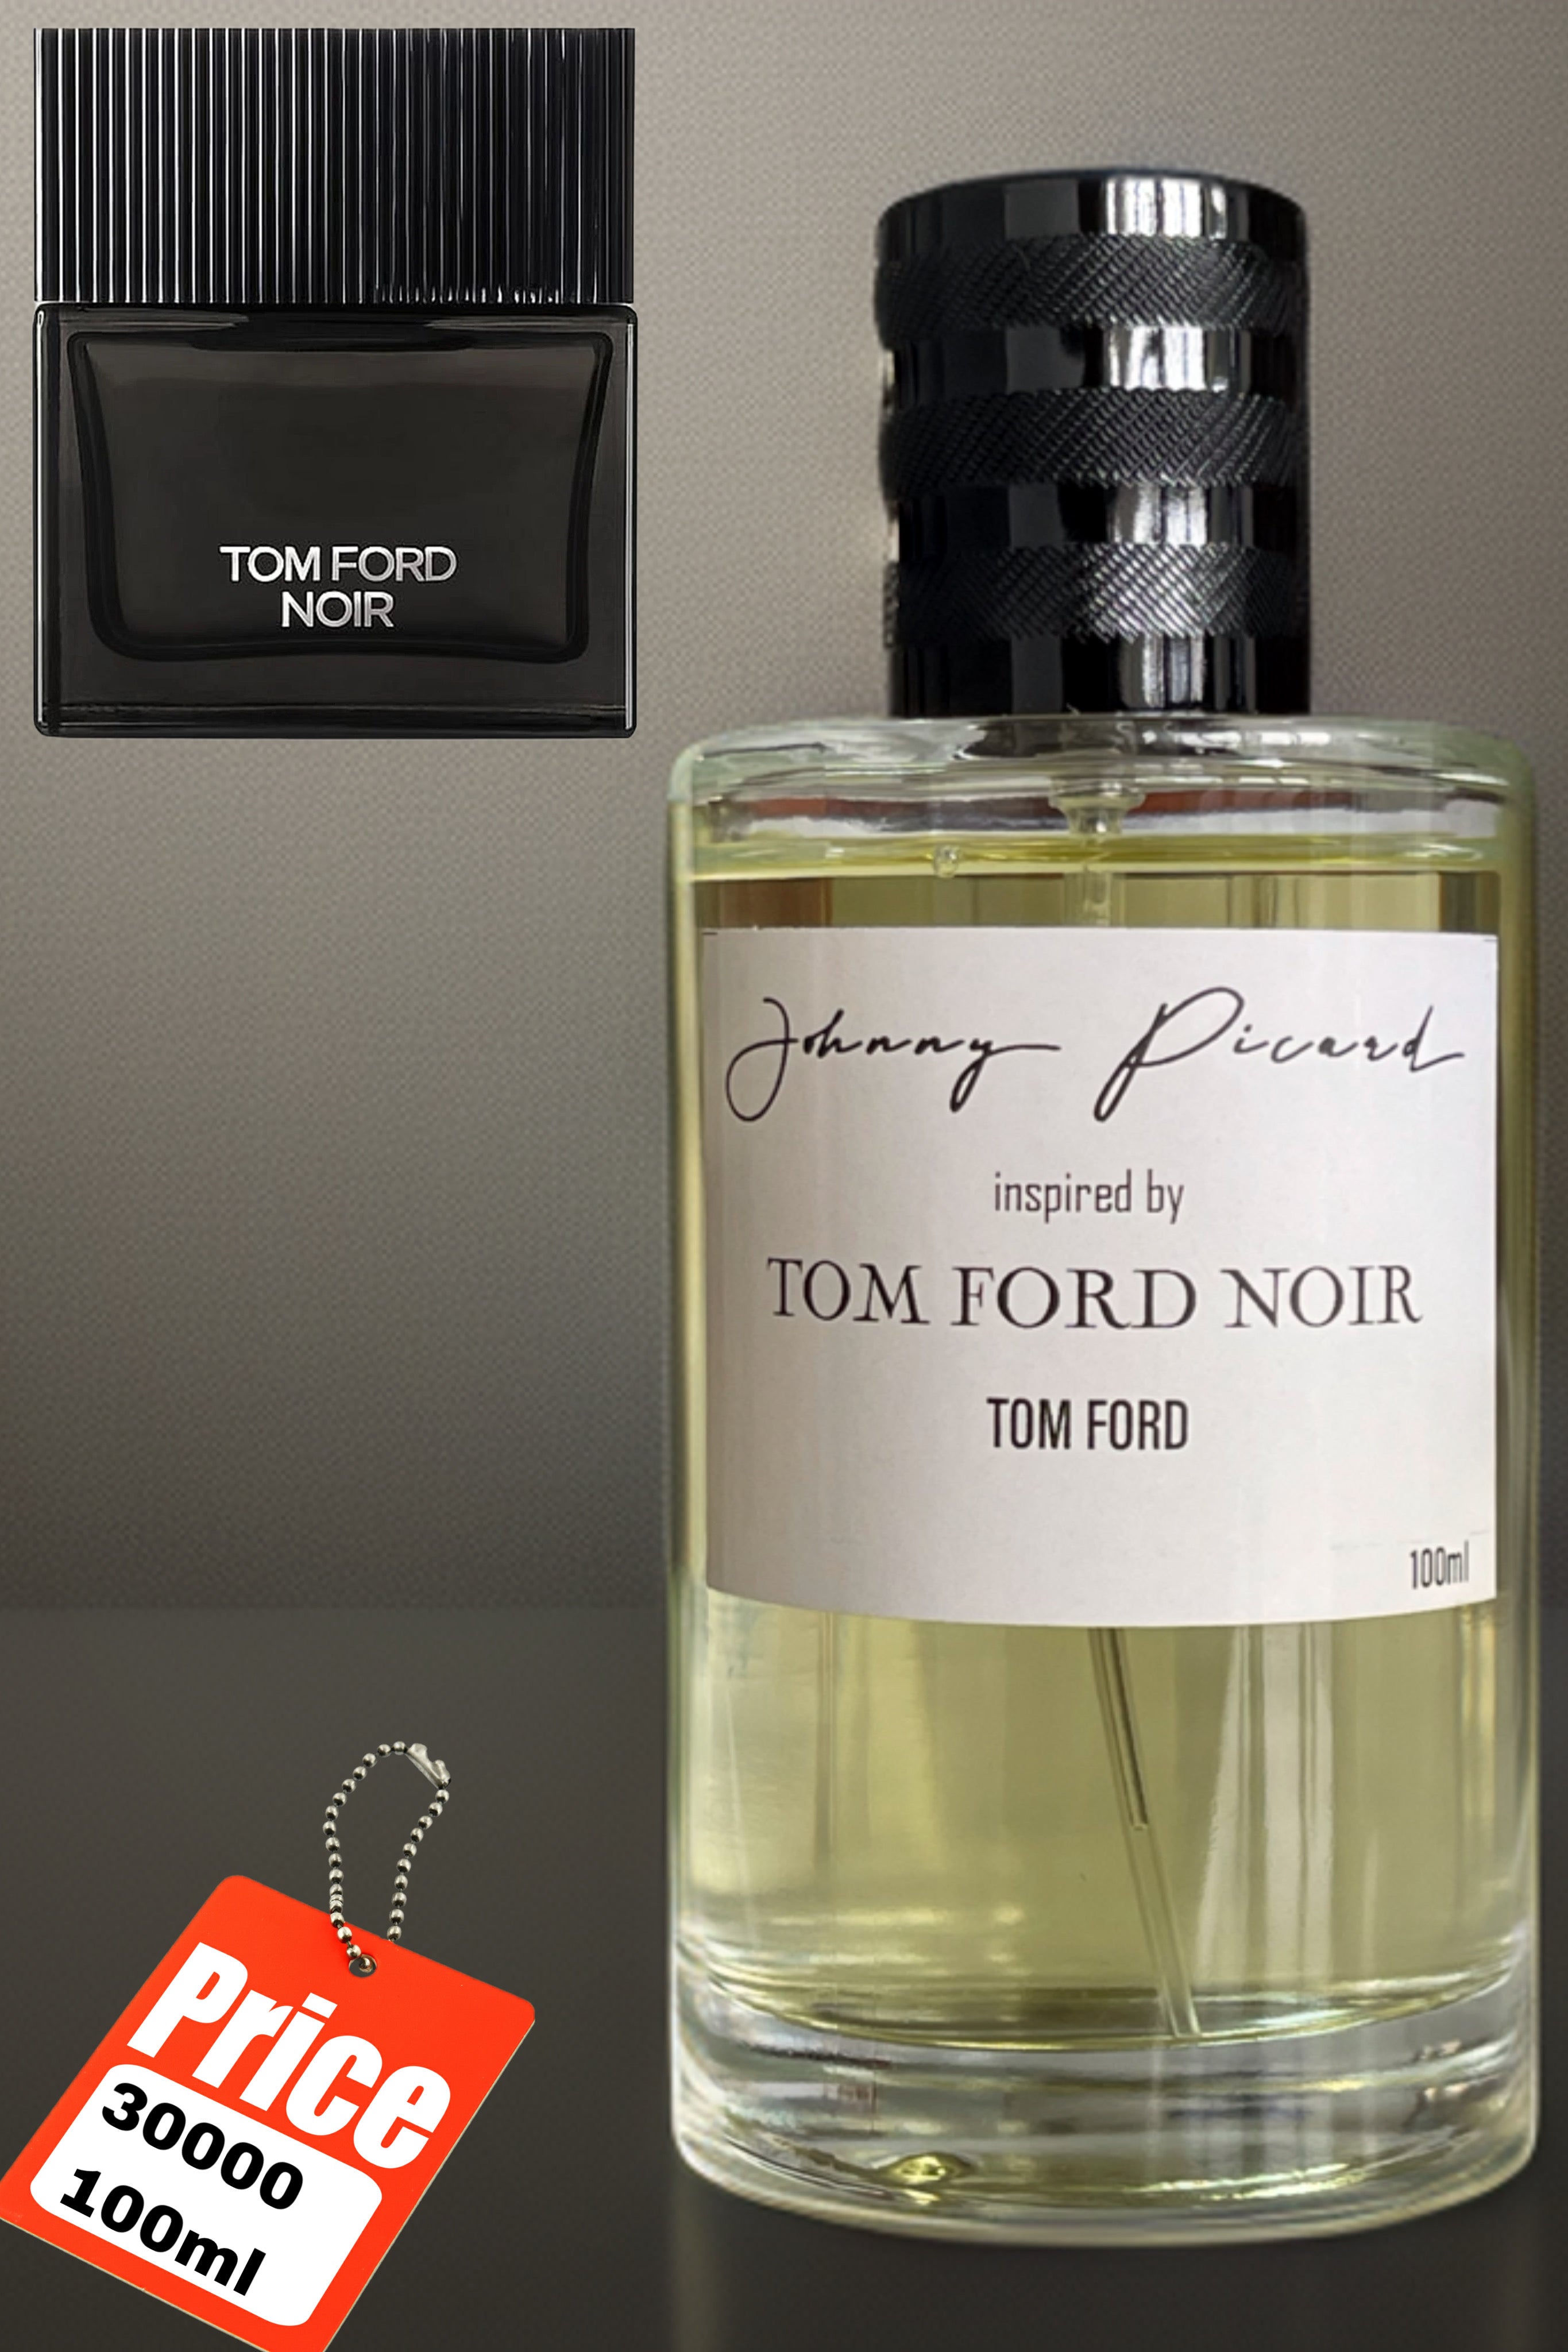 johnny picard inspired by tom ford noir    TOM FORD